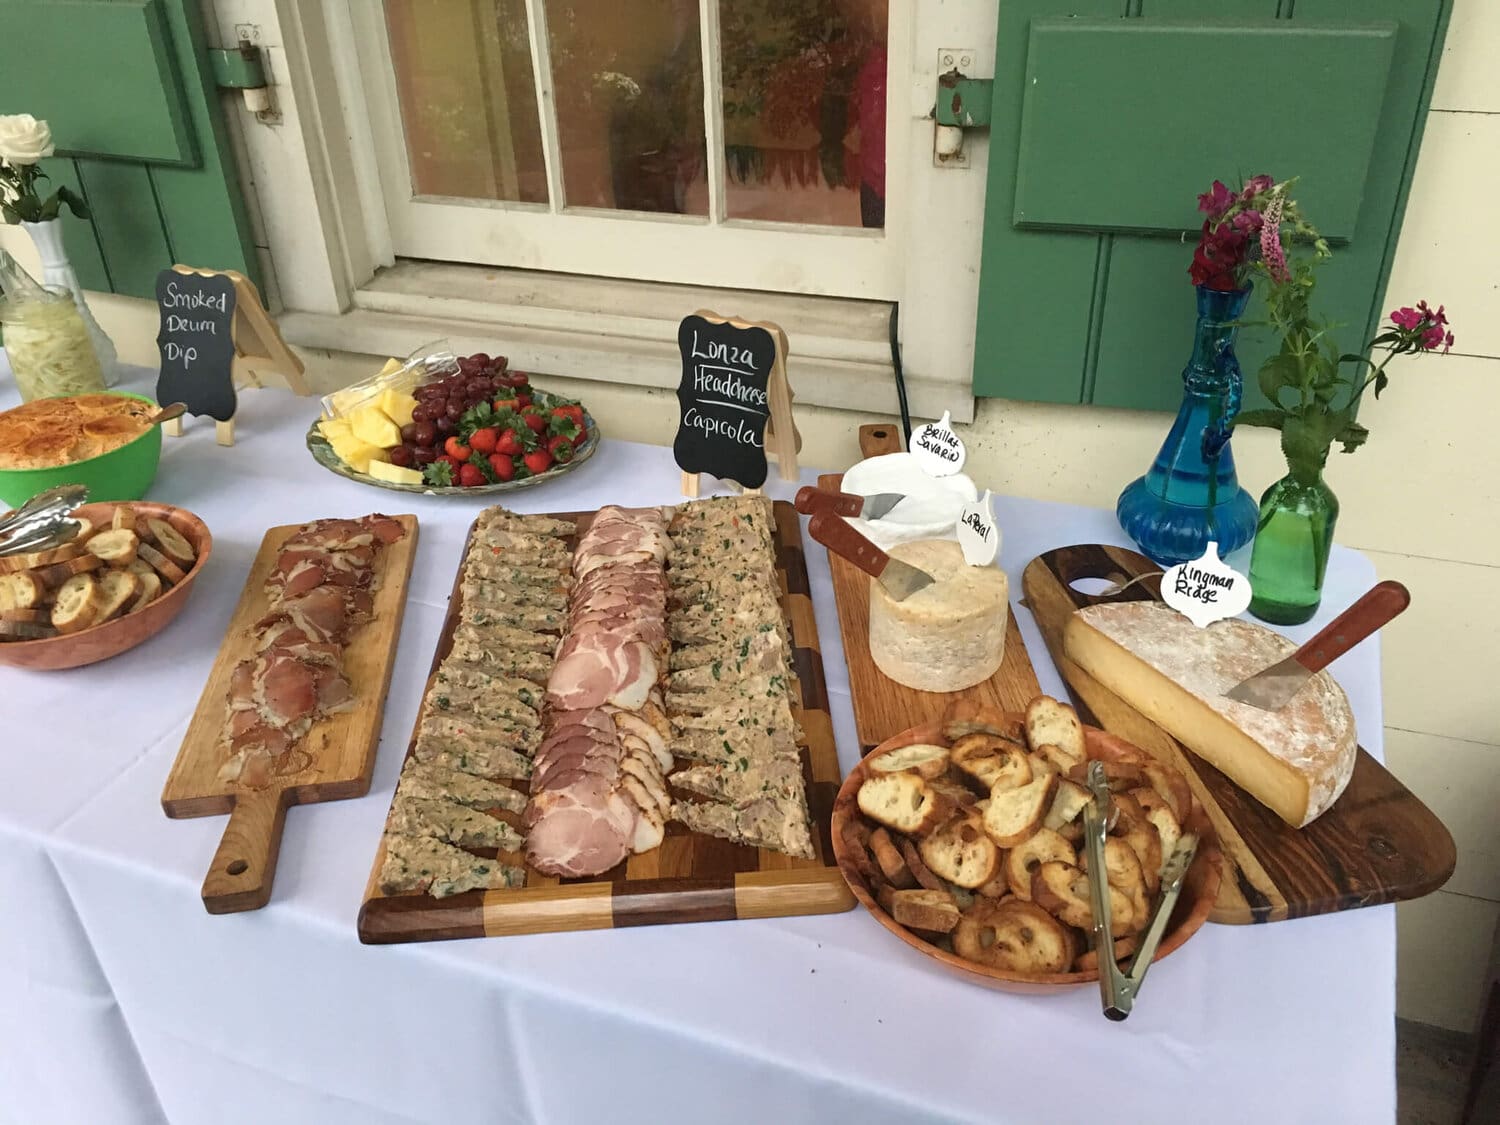 Charcuterie items on table ready to serve